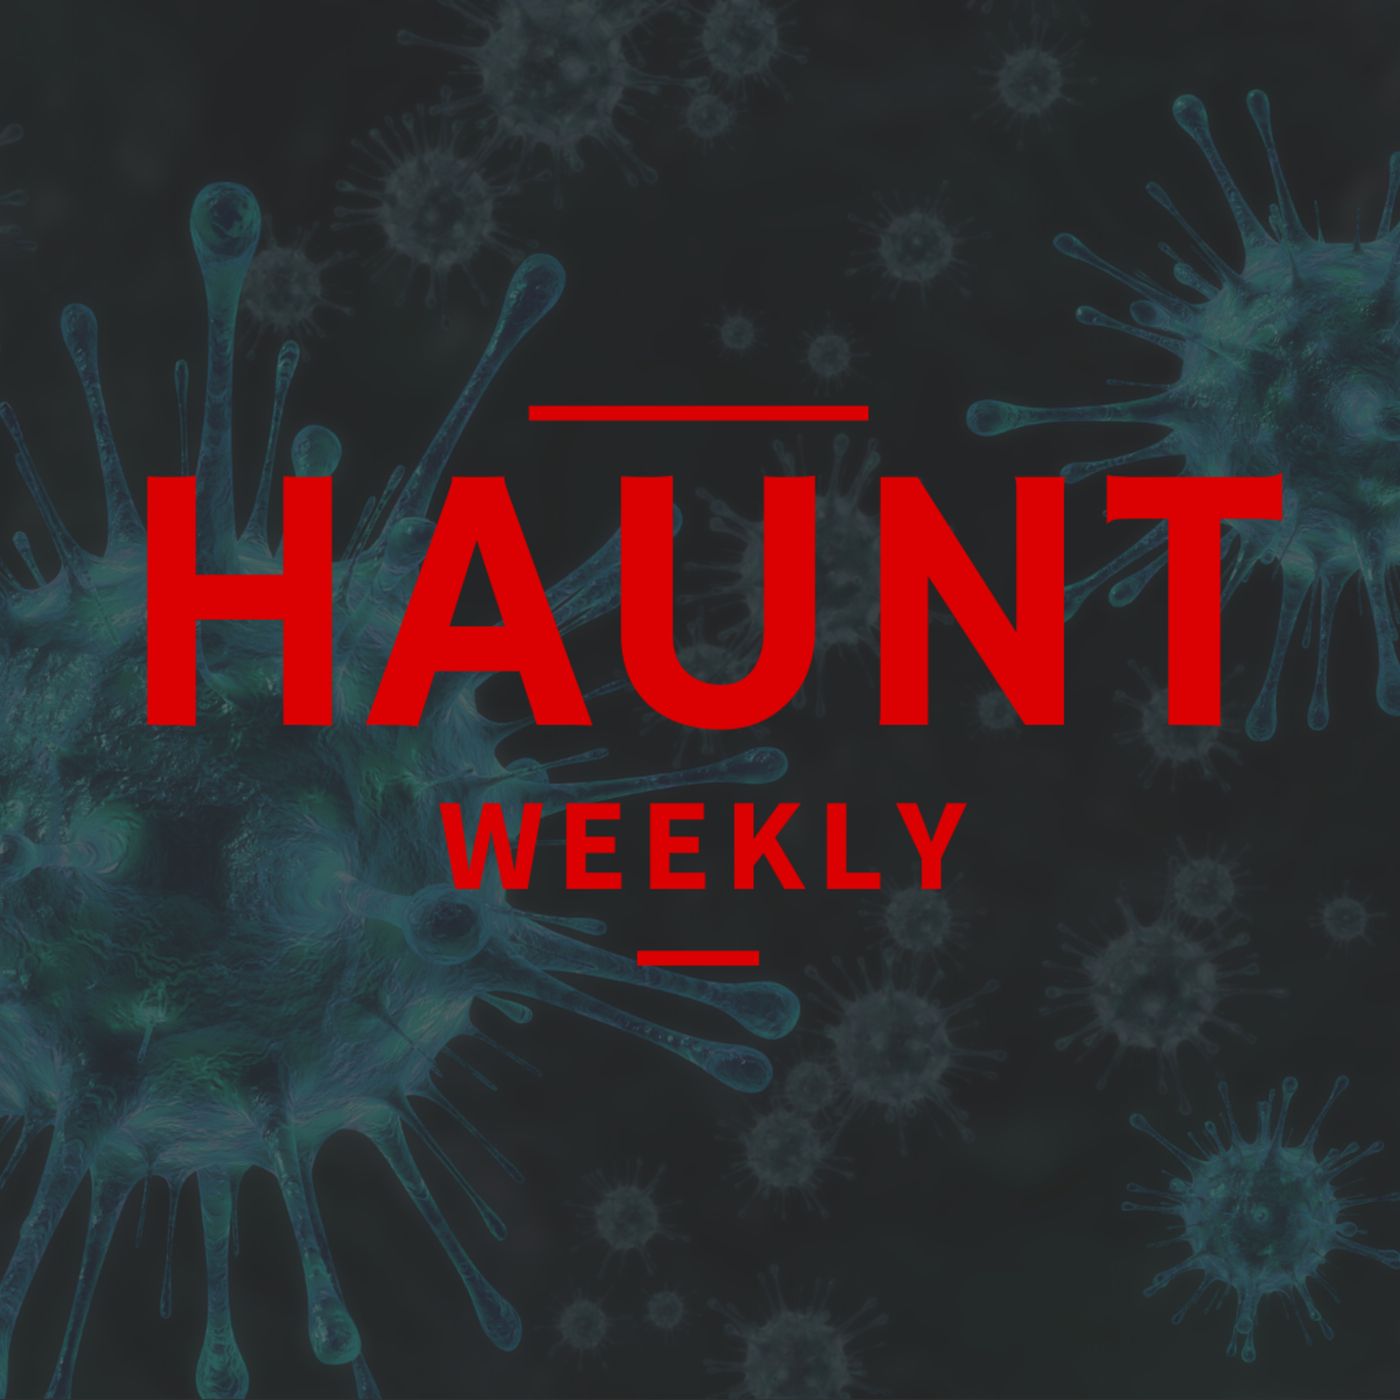 [Haunt Weekly] Episode 224 - February/March News (COVID-19 Edition)